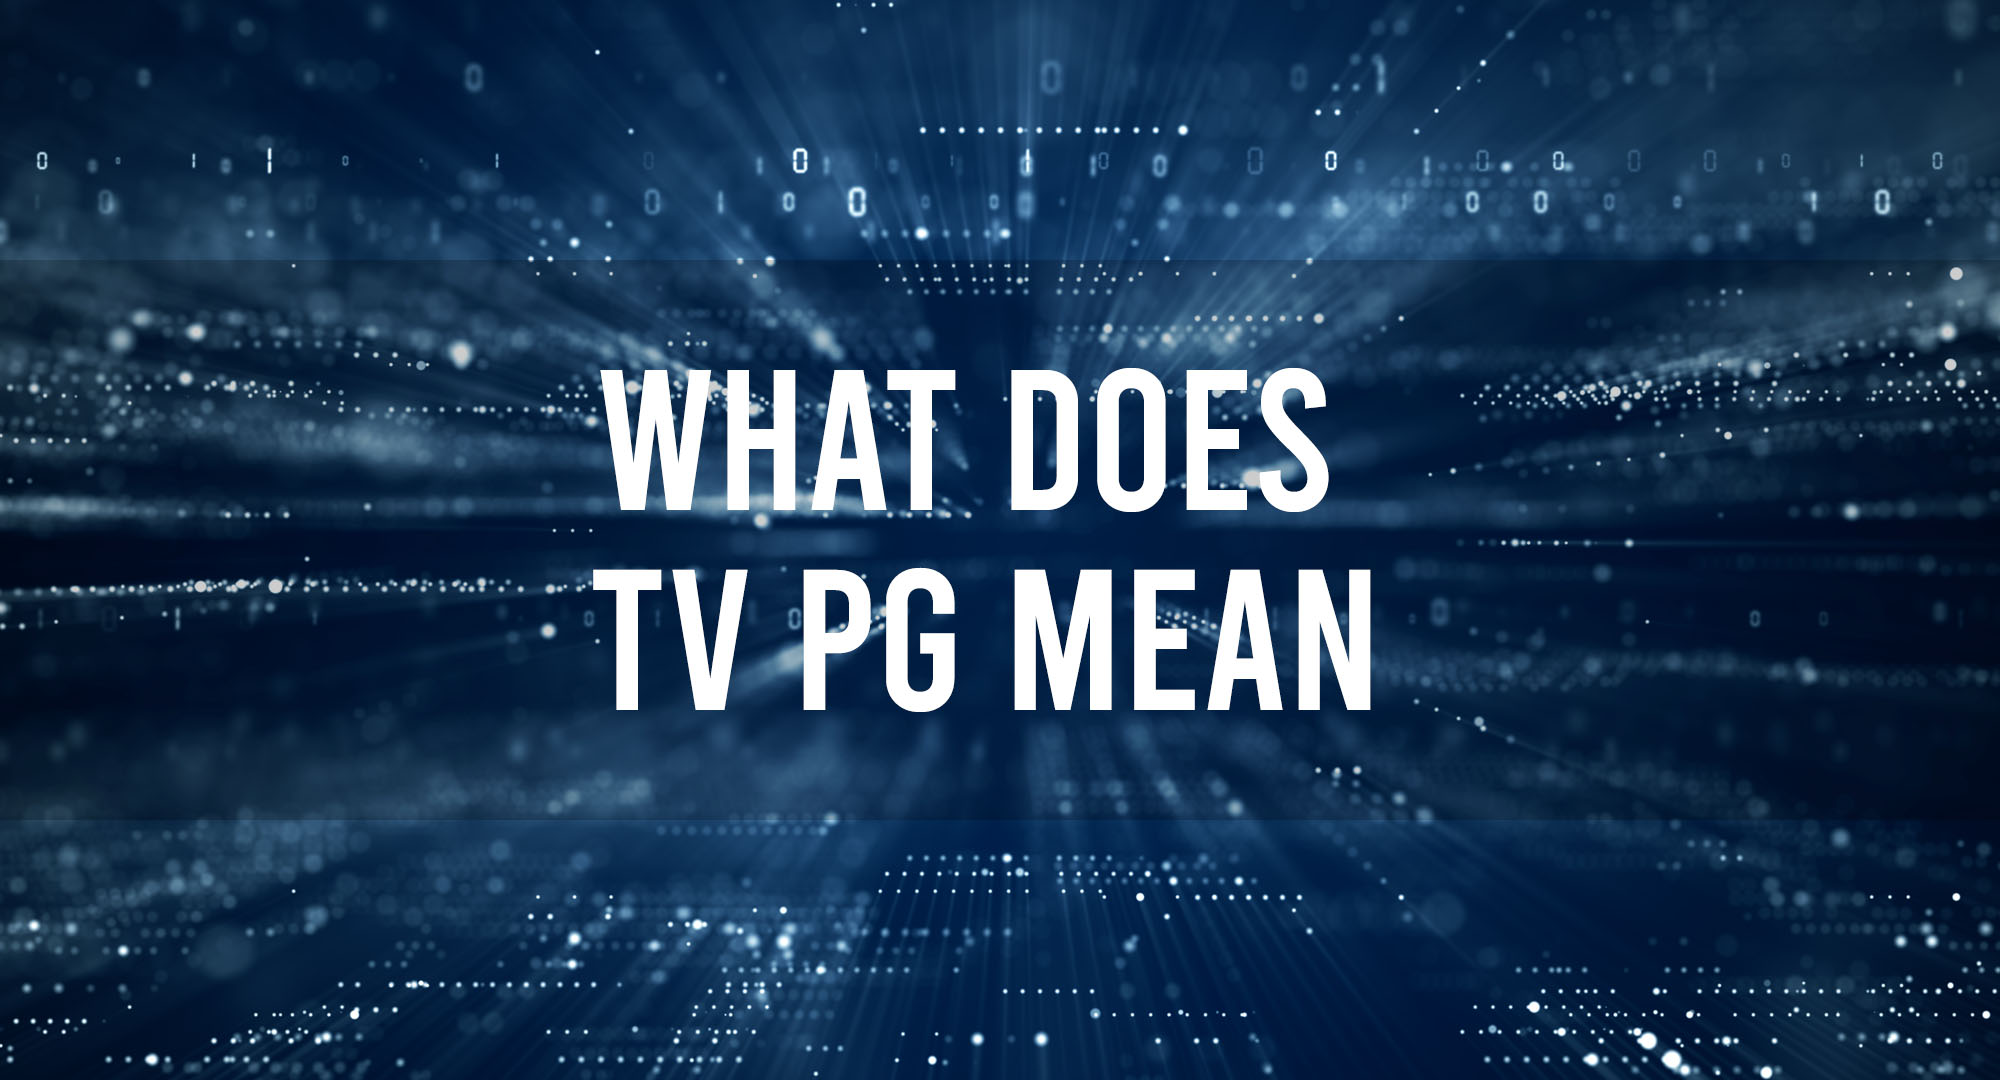 What does TV PG Mean